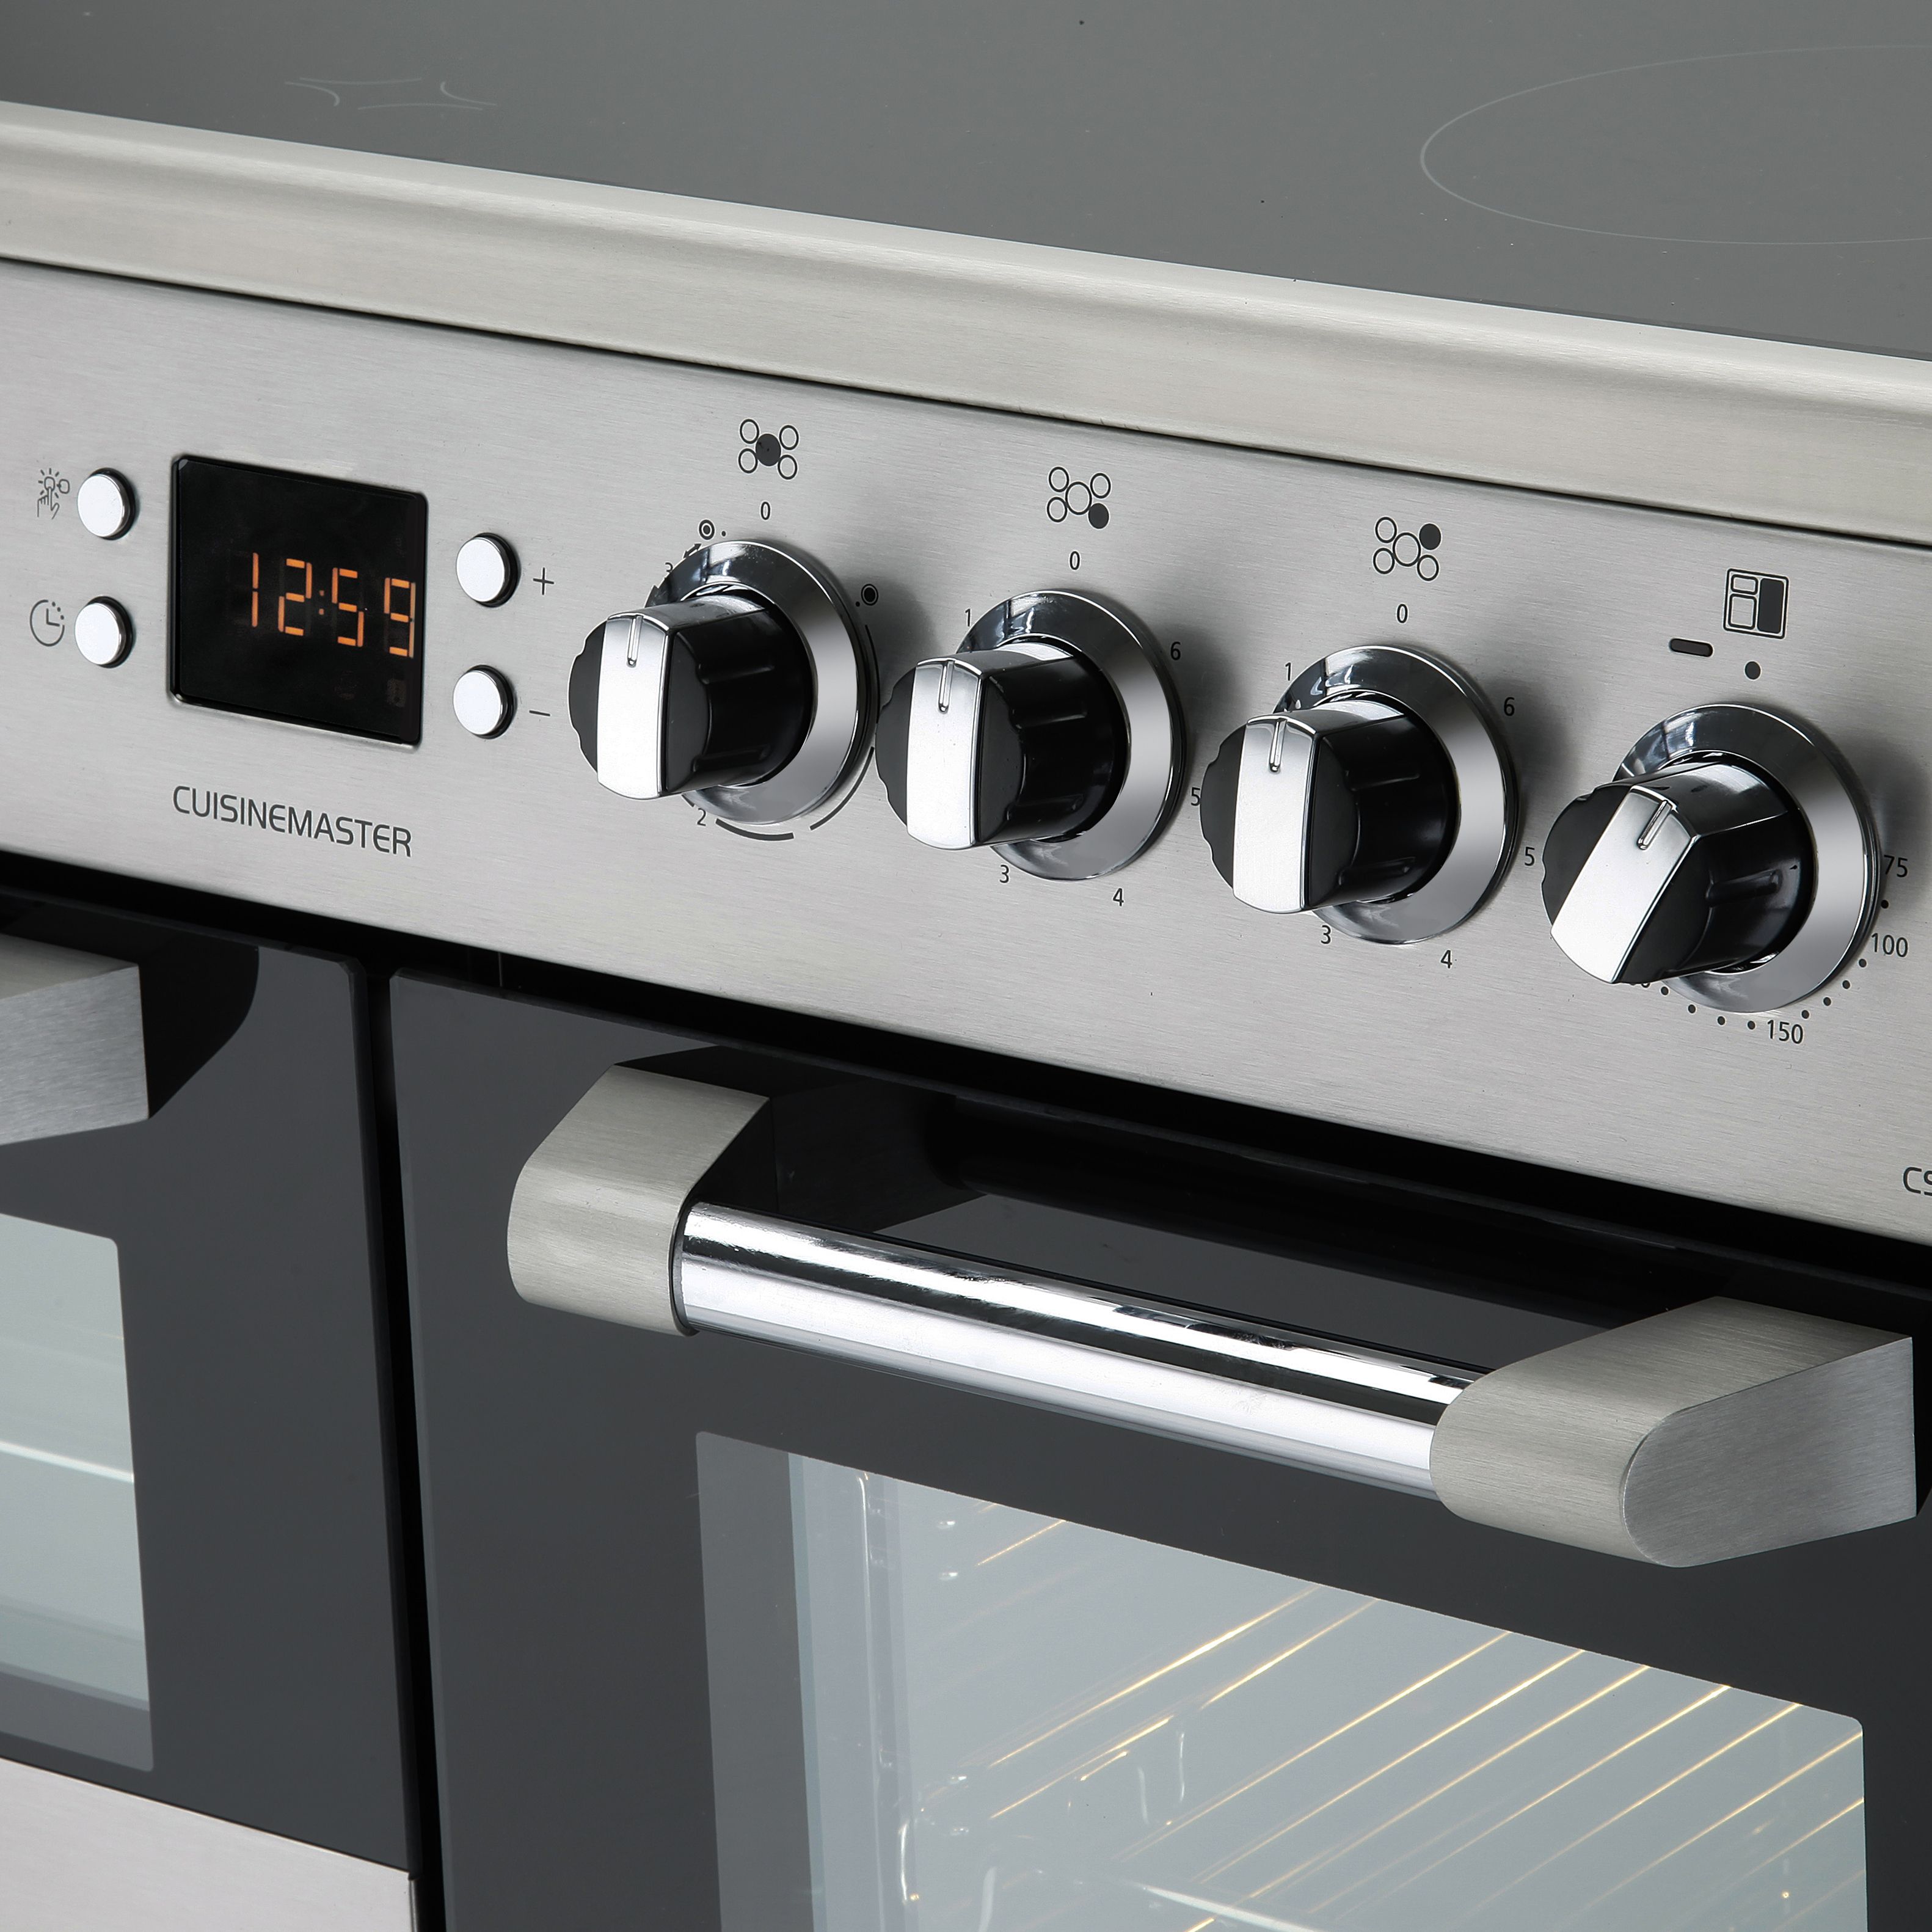 Leisure CS90C530X Freestanding Electric Range cooker with Ceramic Hob - Stainless steel effect